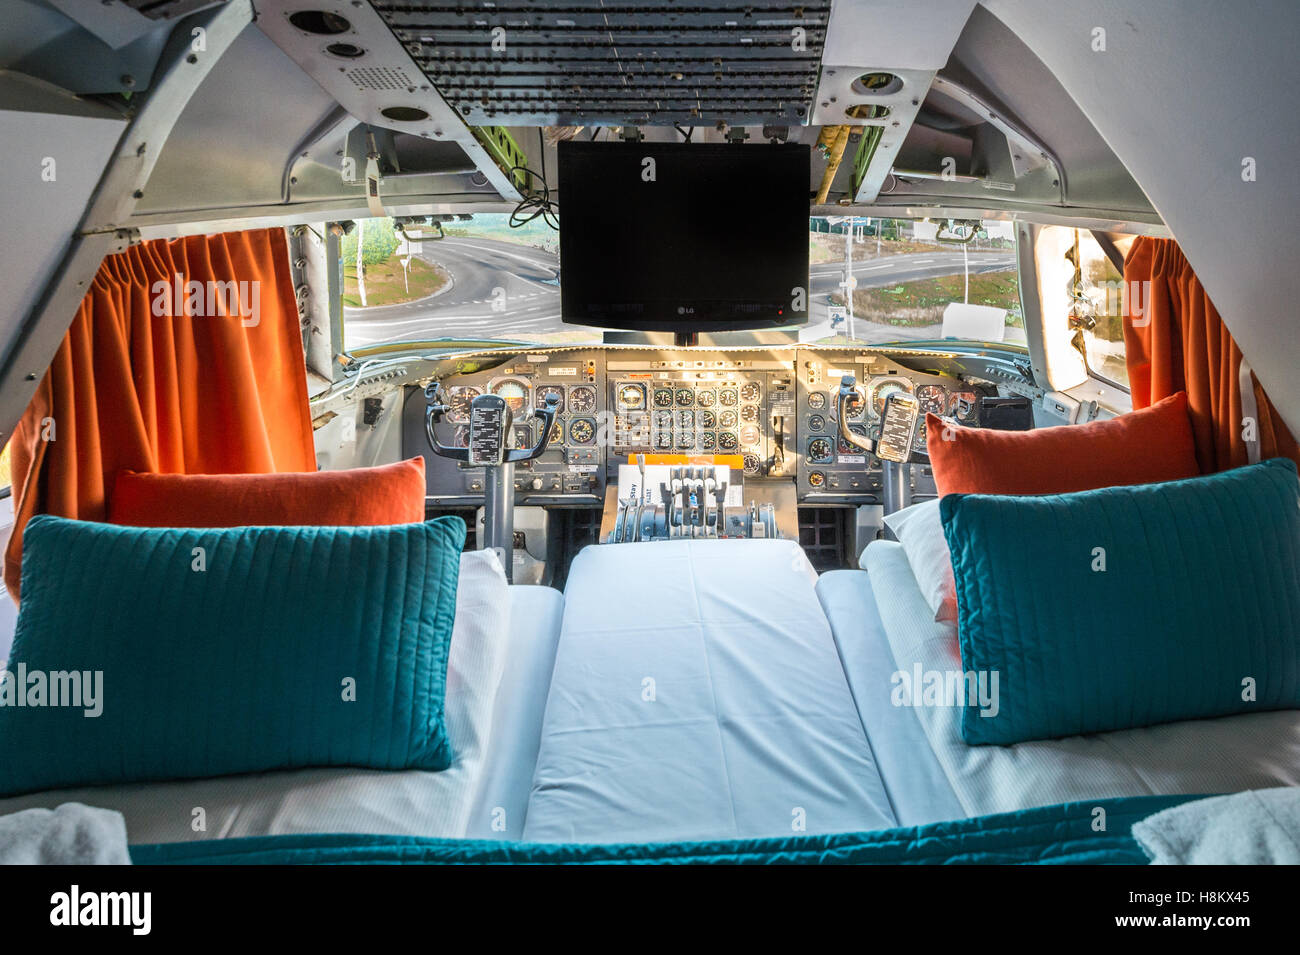 Stockholm, Arlanda, Sweden - The cockpit room at the Jumbo Stay (Jumbohostel), a hostel that is a converted Boeing 747 airliner. Stock Photo